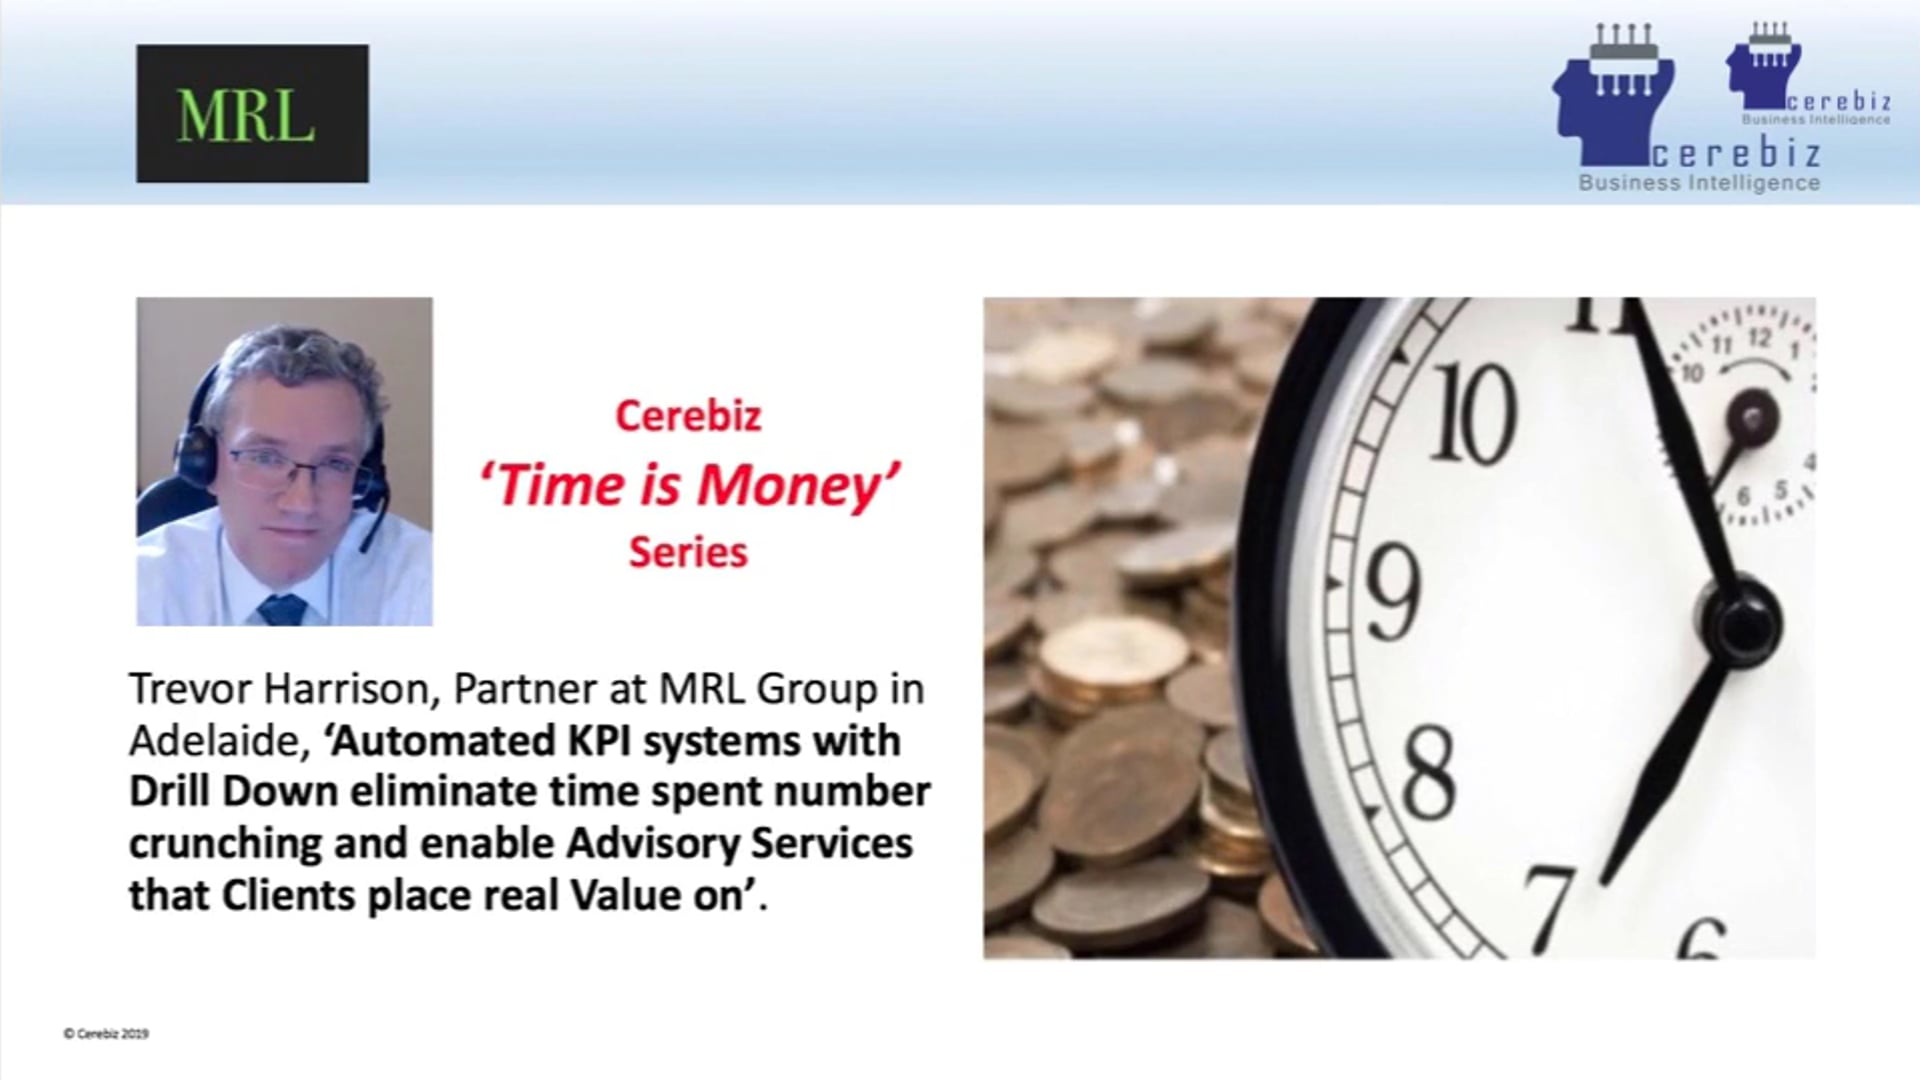 MRL Group - Right Tools to build Advisory Services